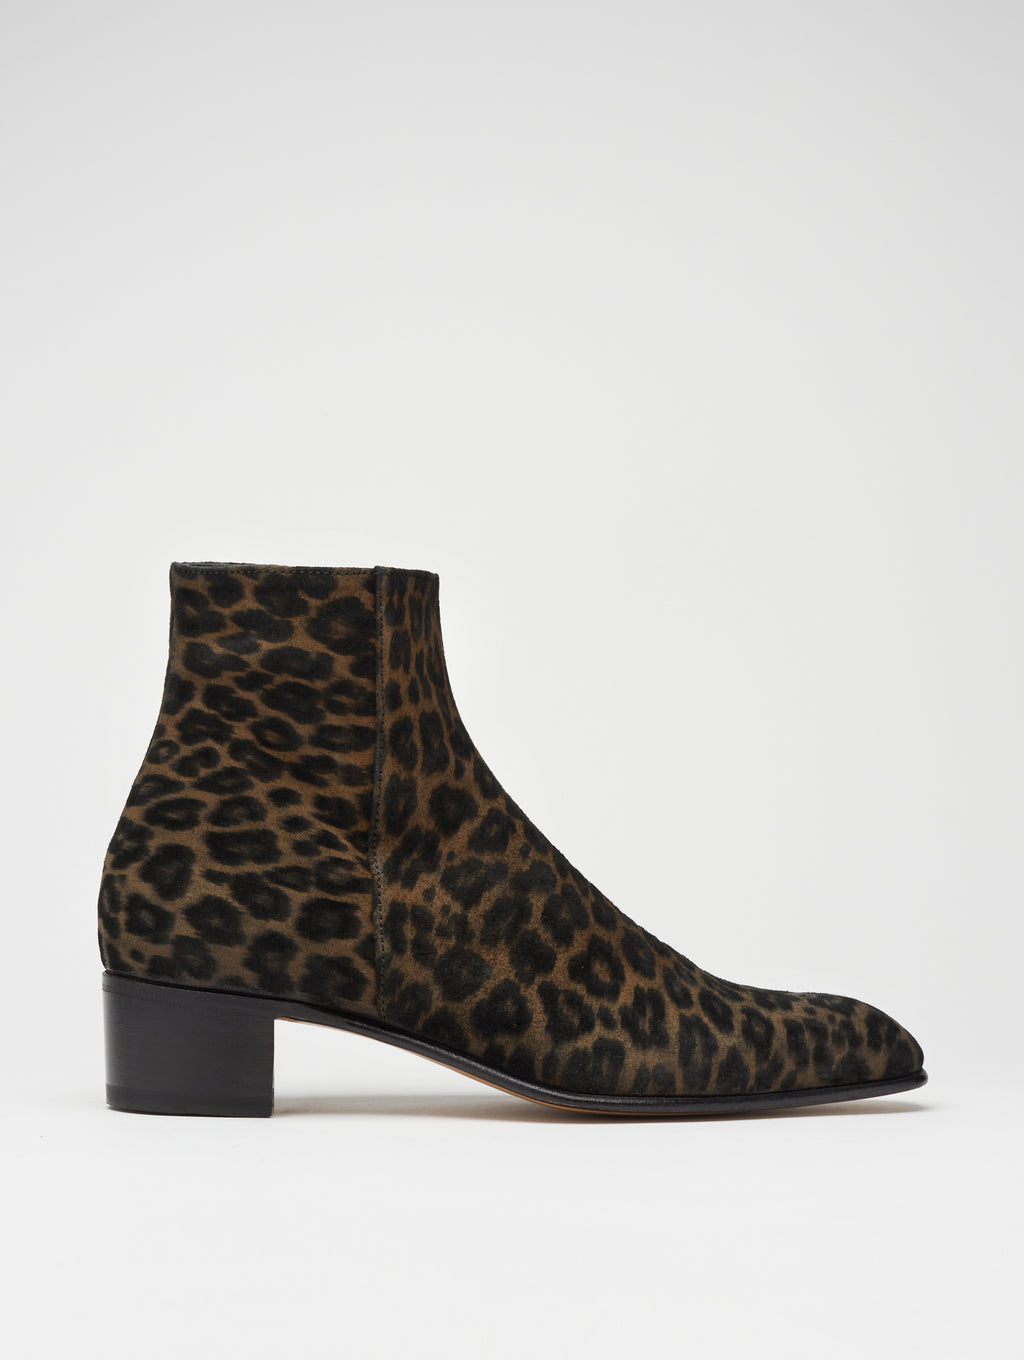 SONNY 40MM ANKLE BOOT IN LEOPARD SUEDE | ALESSANDRO VASINI